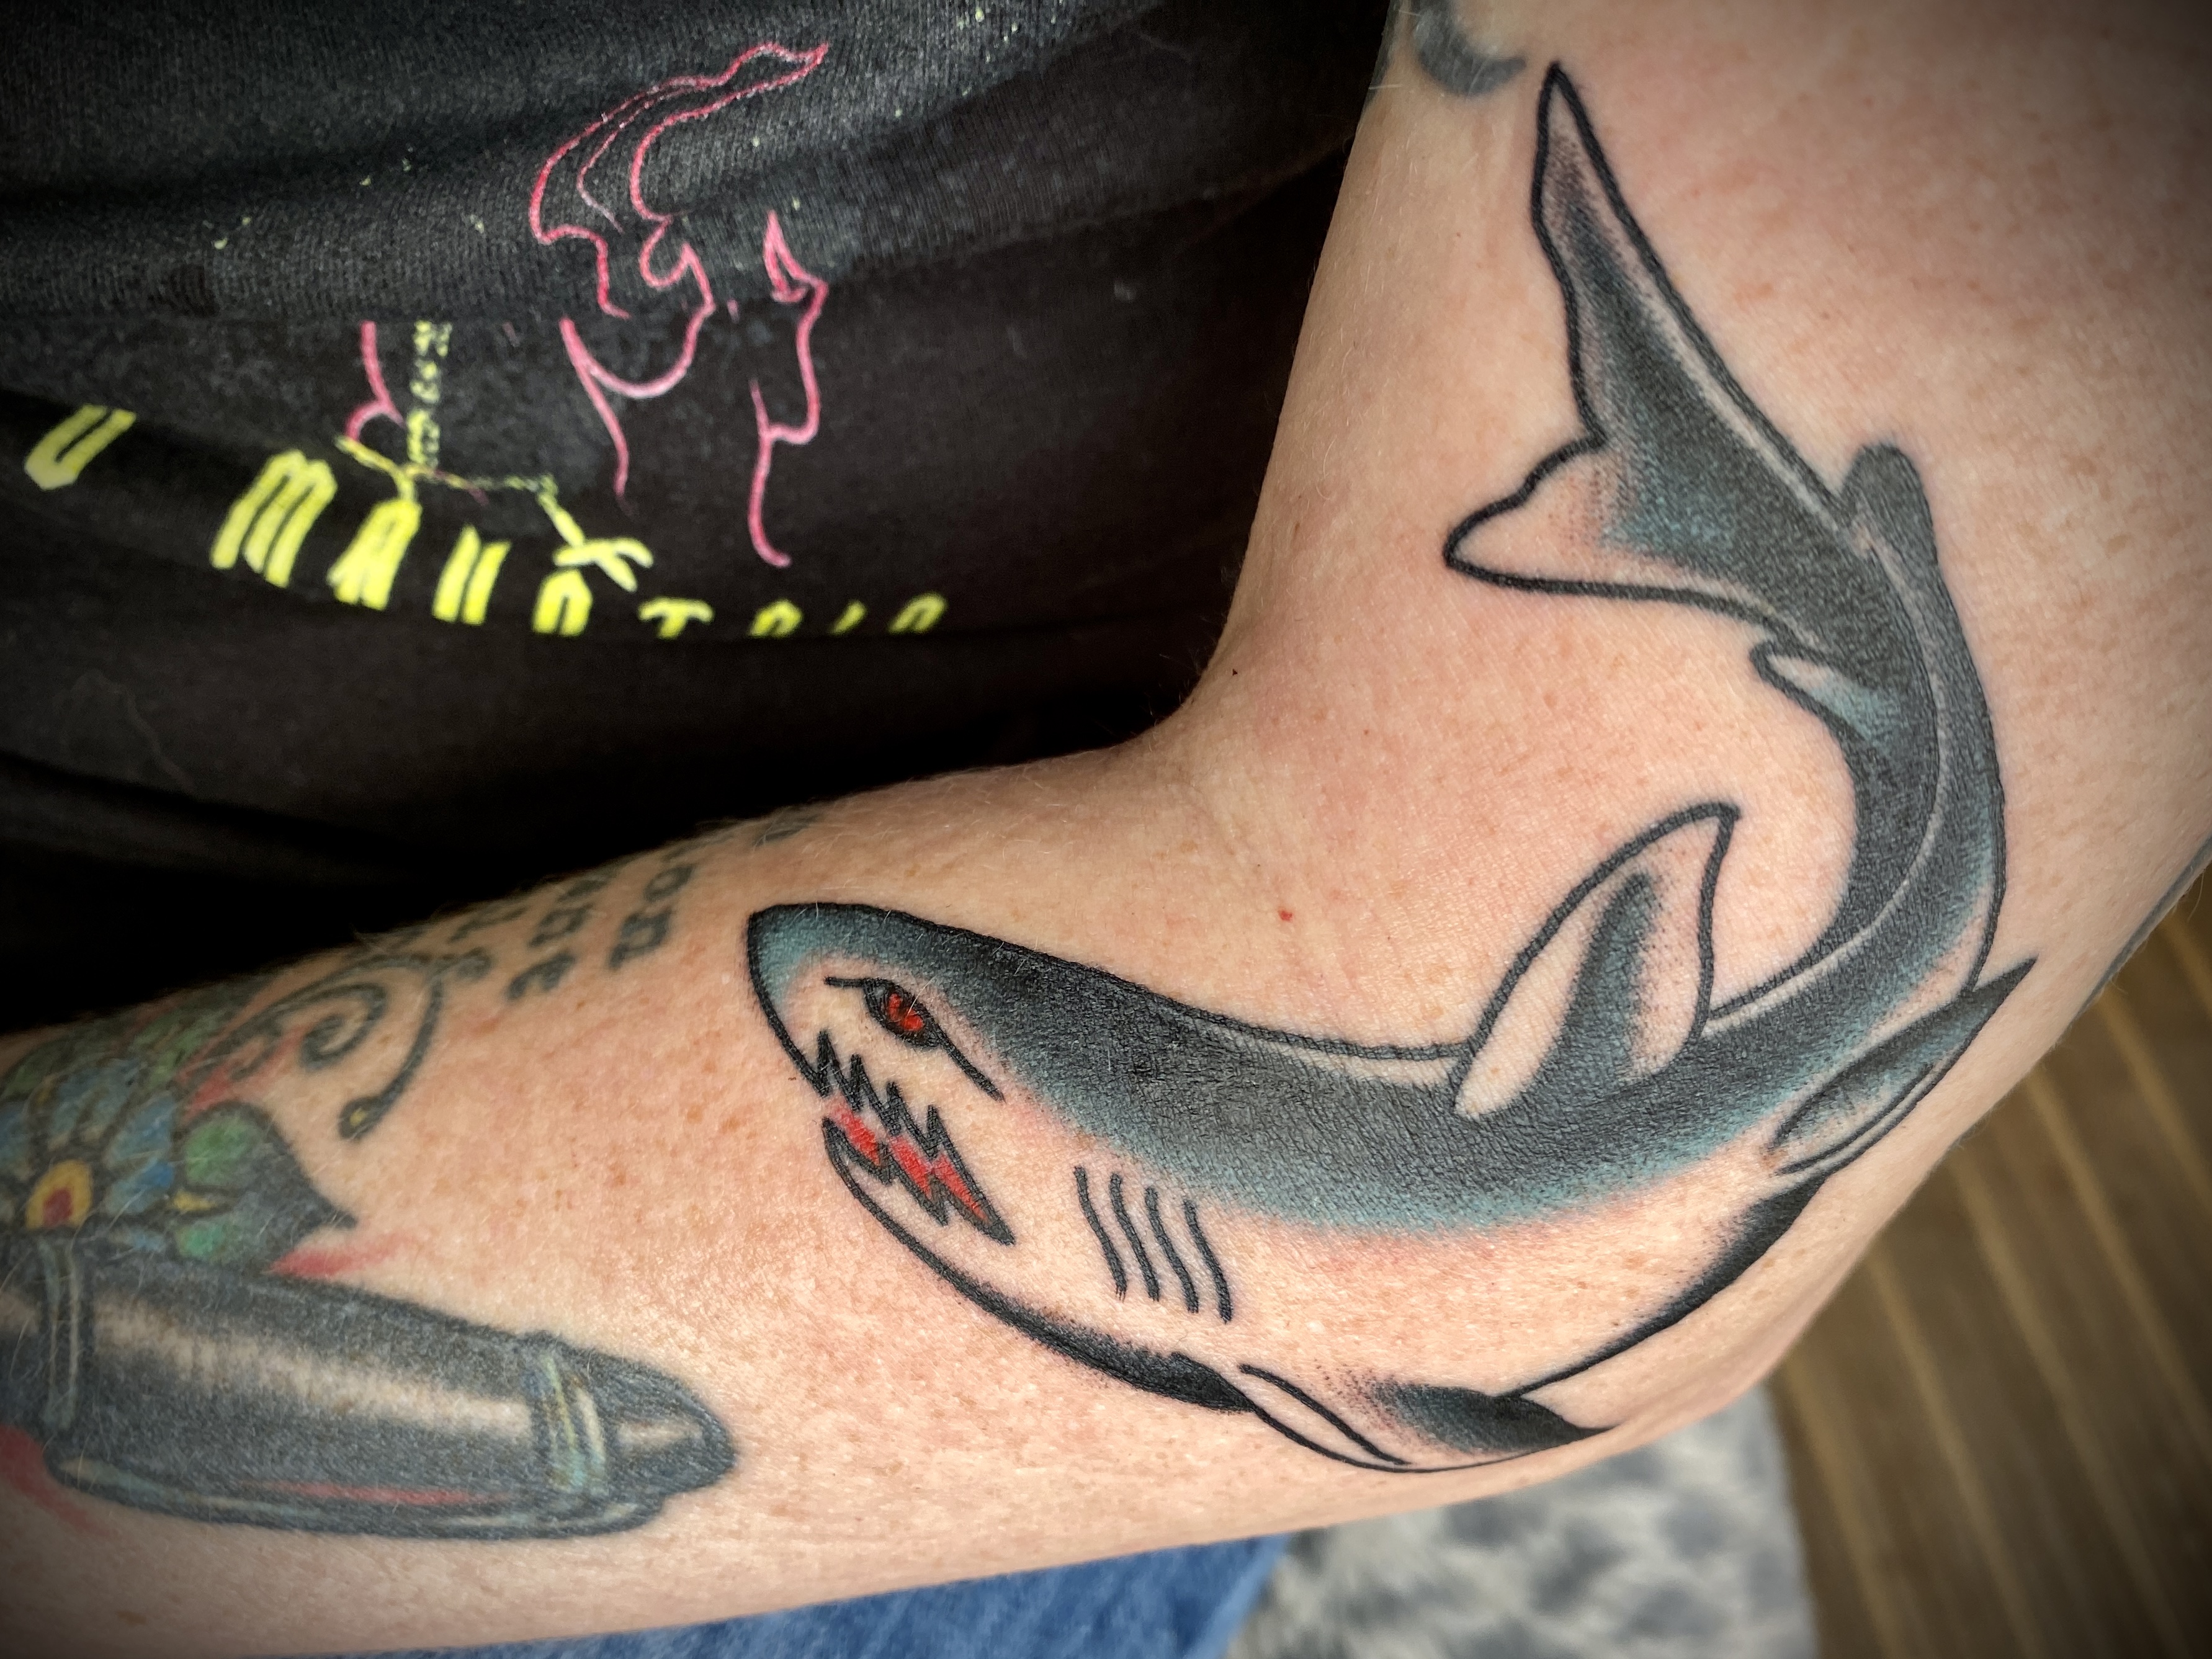 A white woman's bent elbow with a curved shark tattoo, shaded in dark grey and blue with a red eye and red jagged mouth